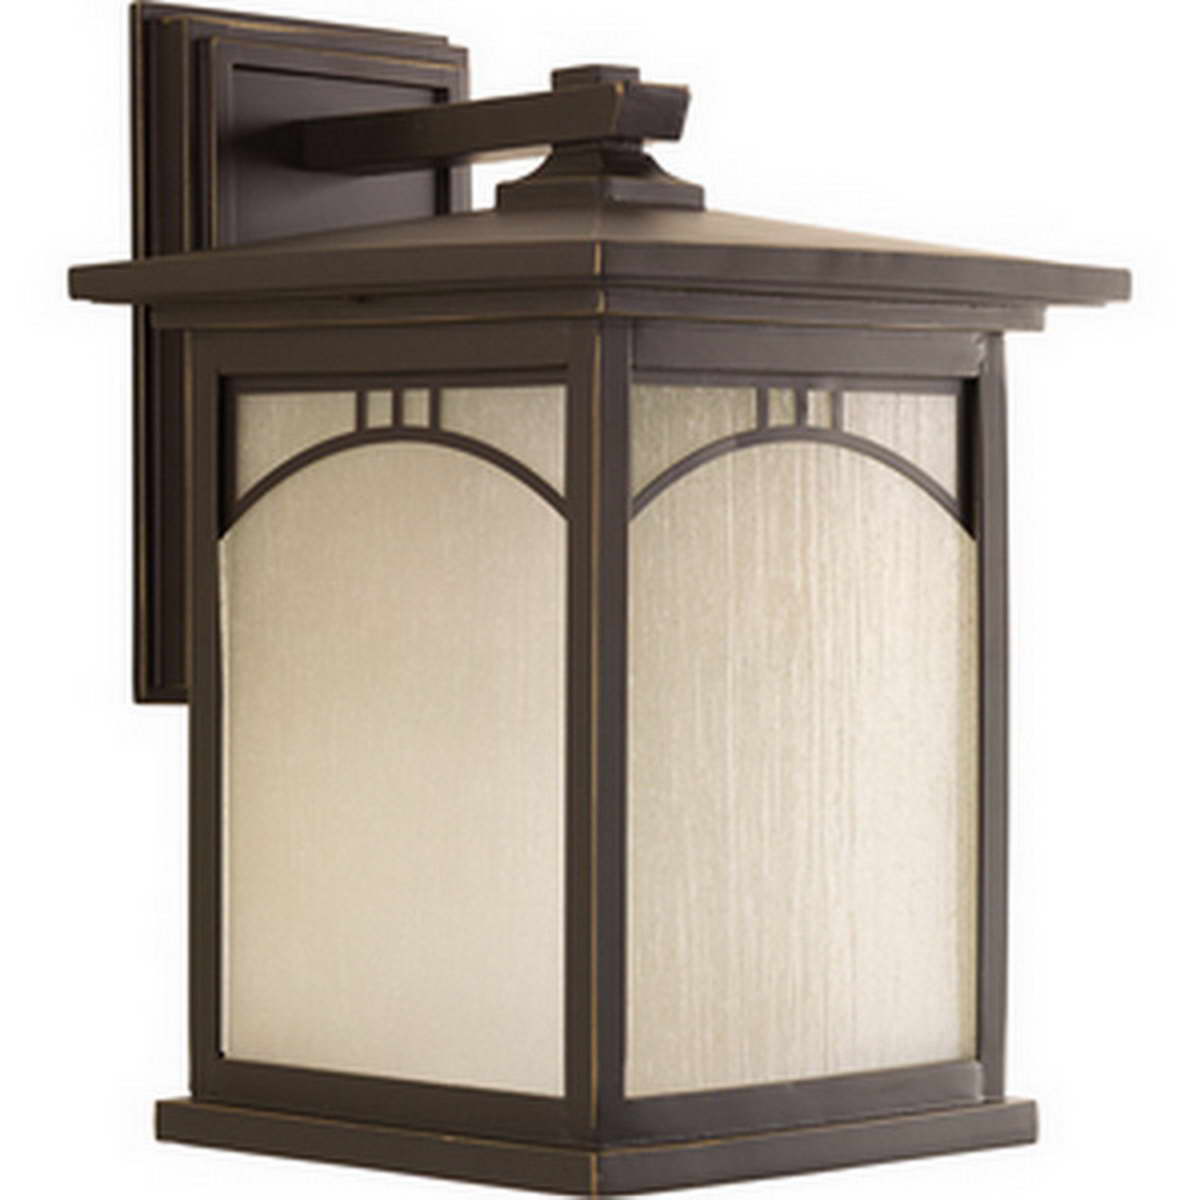 Residence 15 in. Outdoor Wall Light Bronze Finish